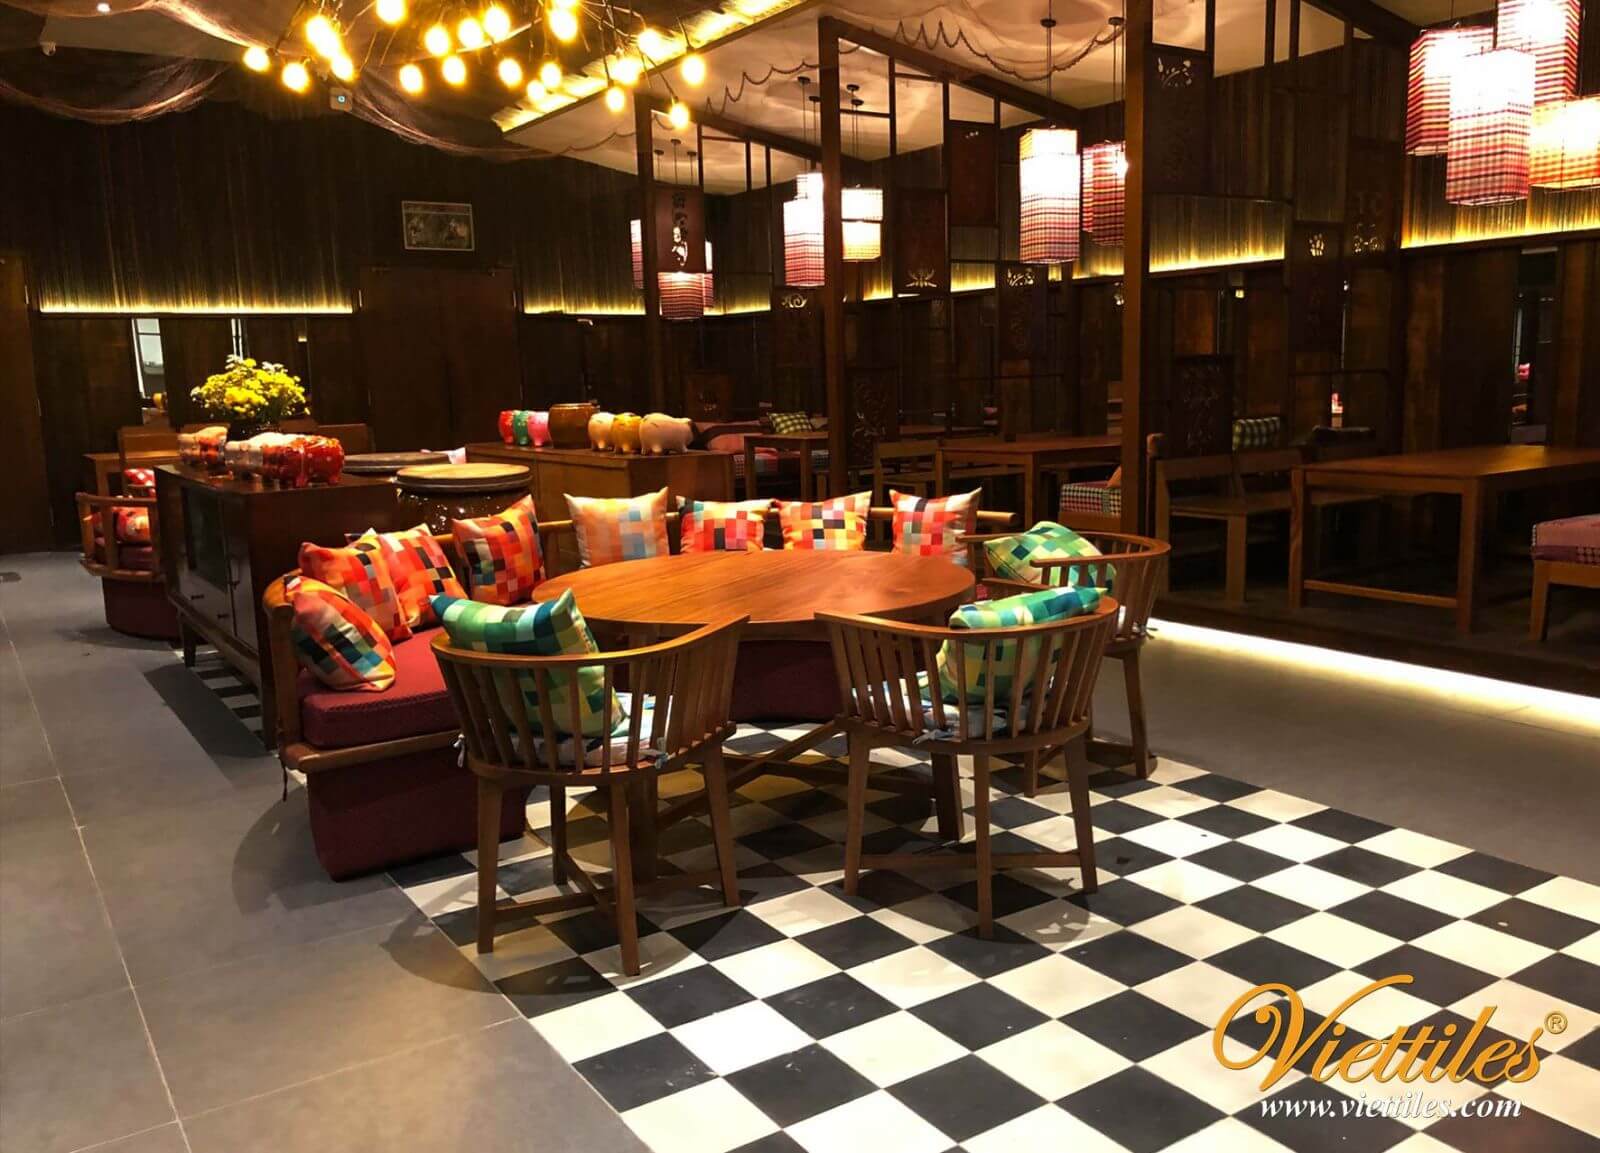 Viettiles's cement tiles with black and white colors is trusted and used by Bep Nha Luc Tinh Restaurant